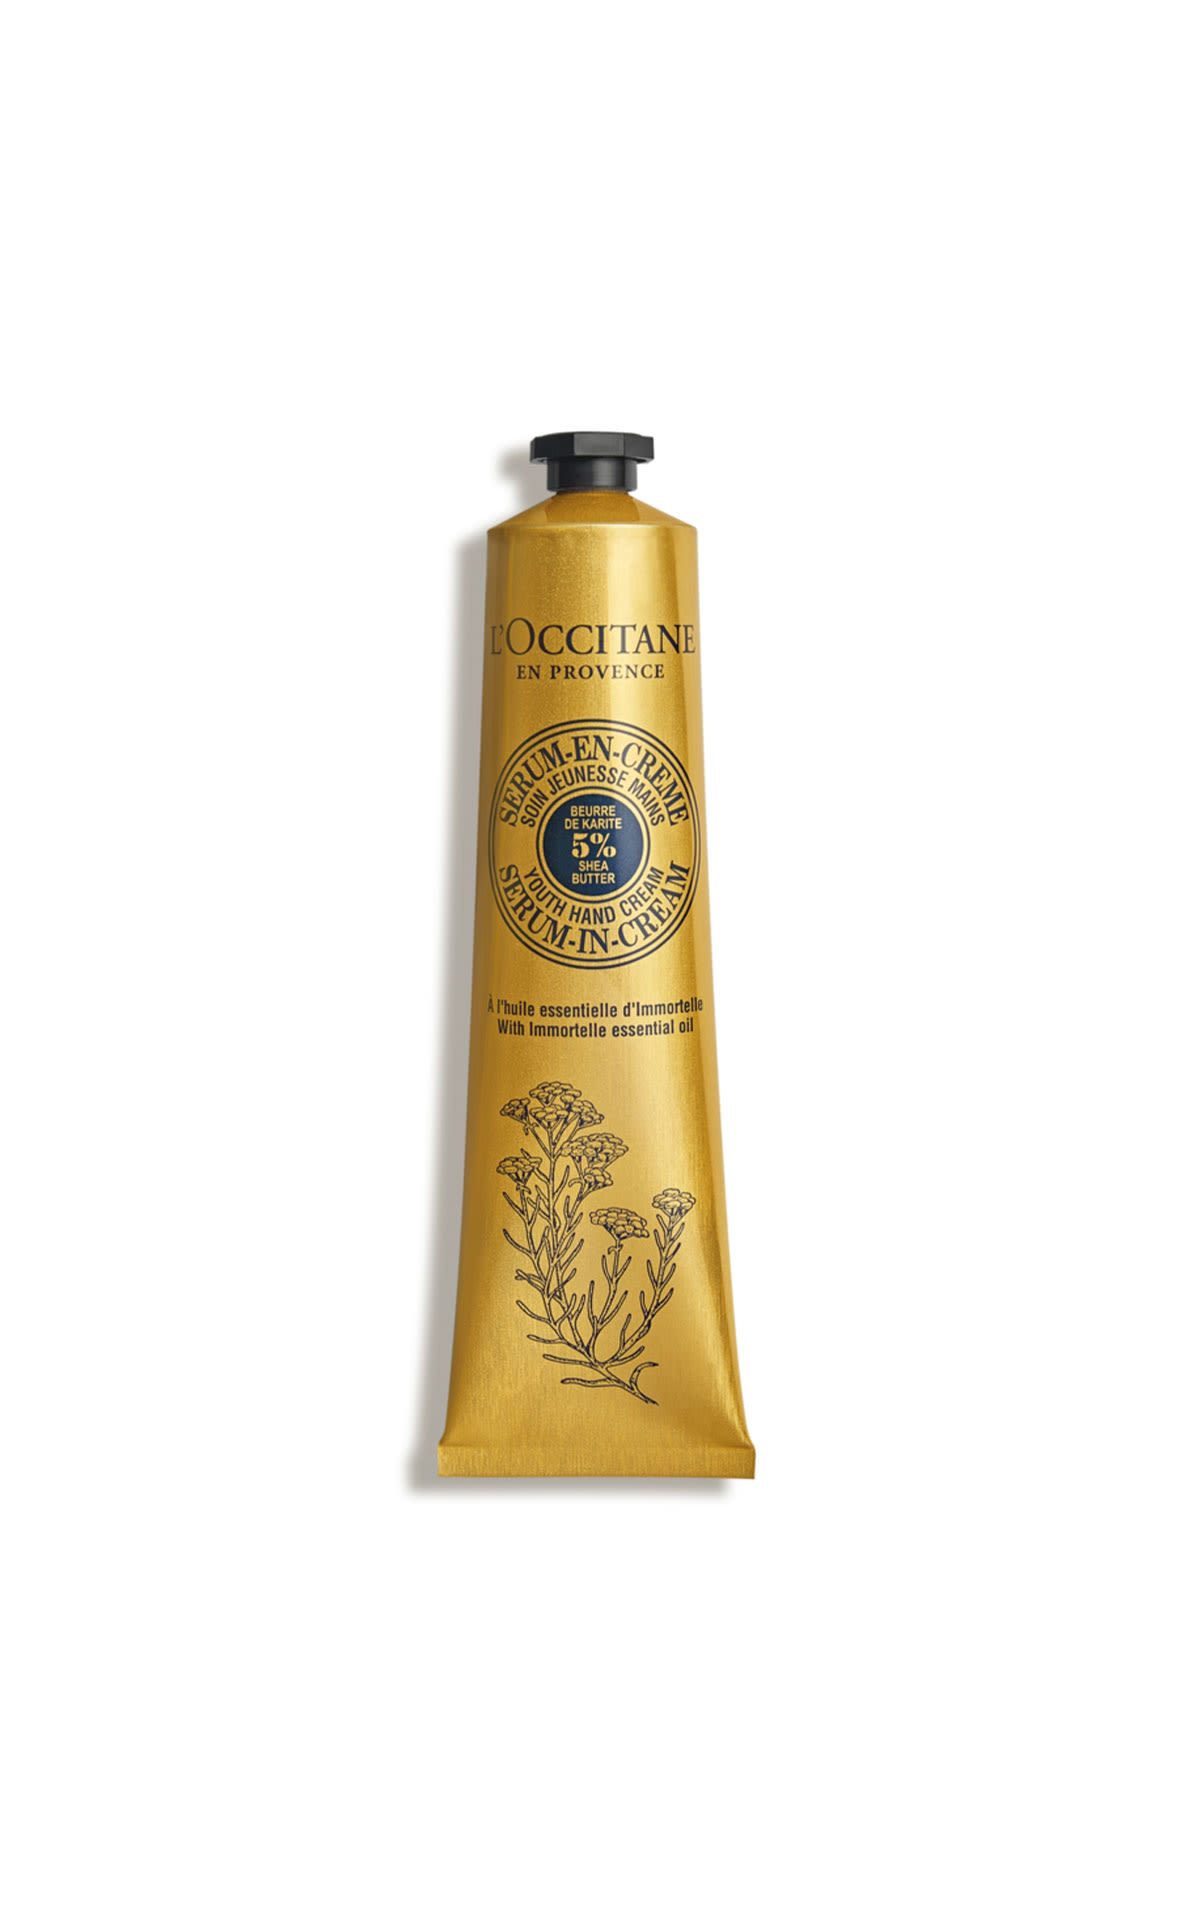 L'Occitane en Provence Youth hand cream 75ml from Bicester Village